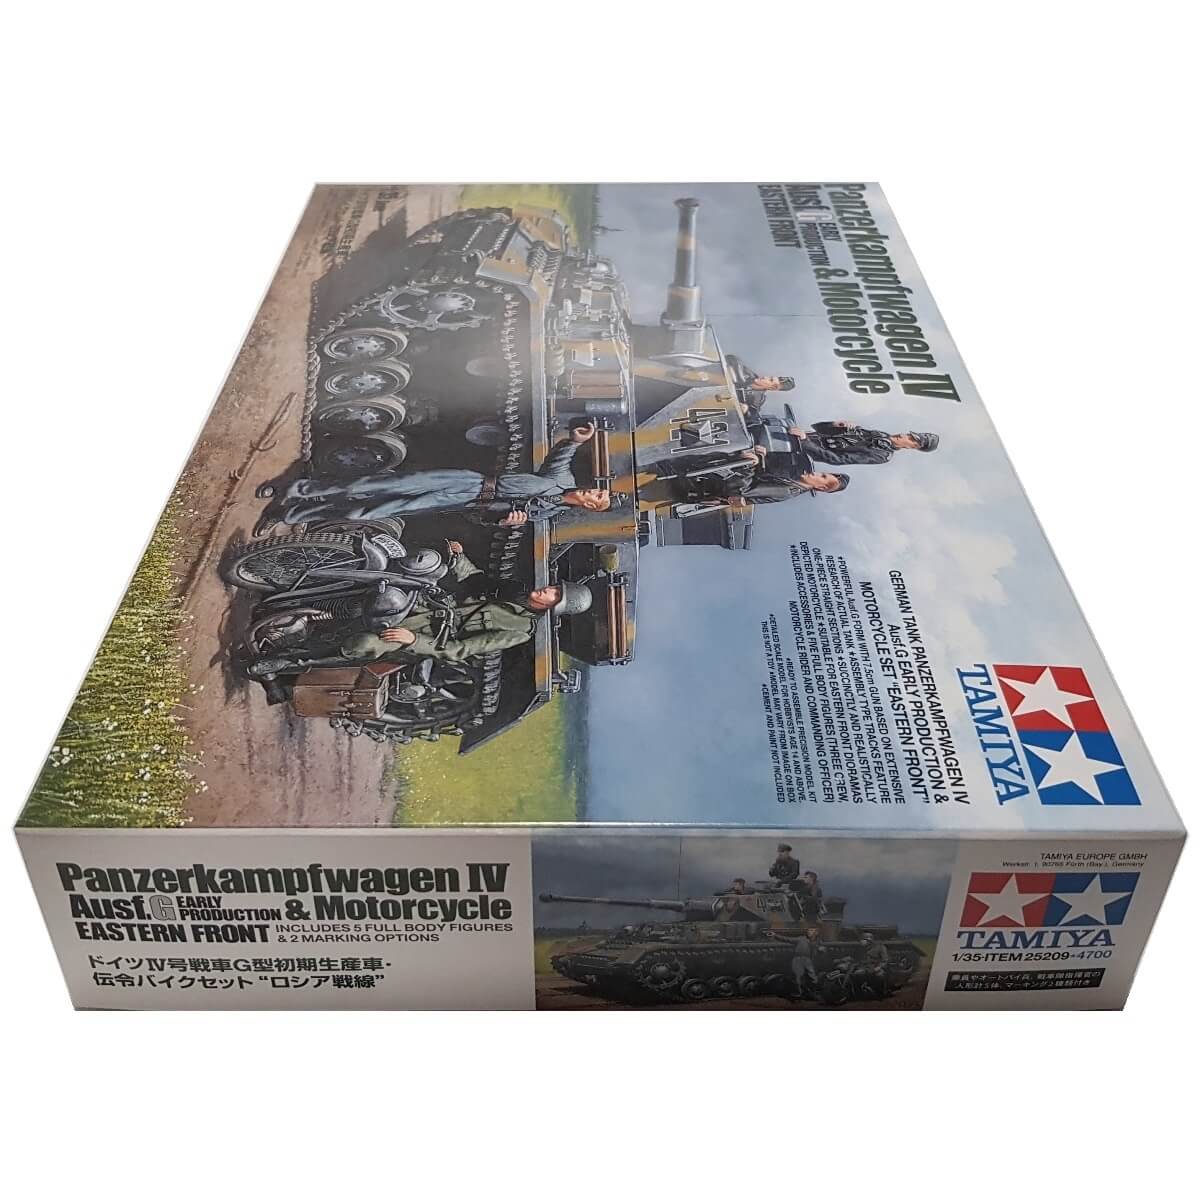 1:35 Panzerkampfwagen IV Ausf G. Early Production and Motorcycle - Eastern Front - TAMIYA